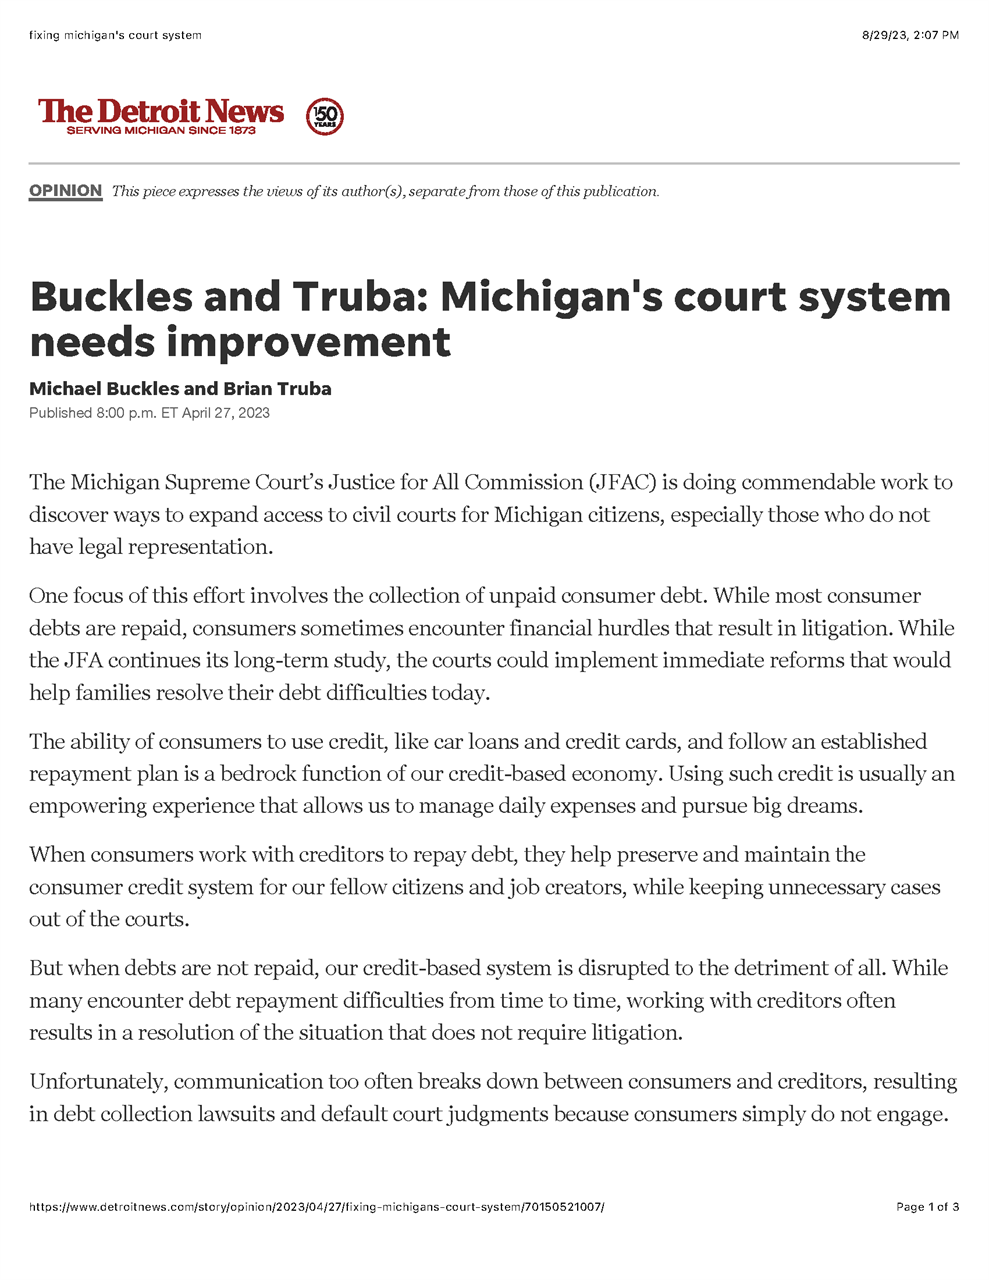 Buckles and Truba op-ed: Michigan's court system needs improvement